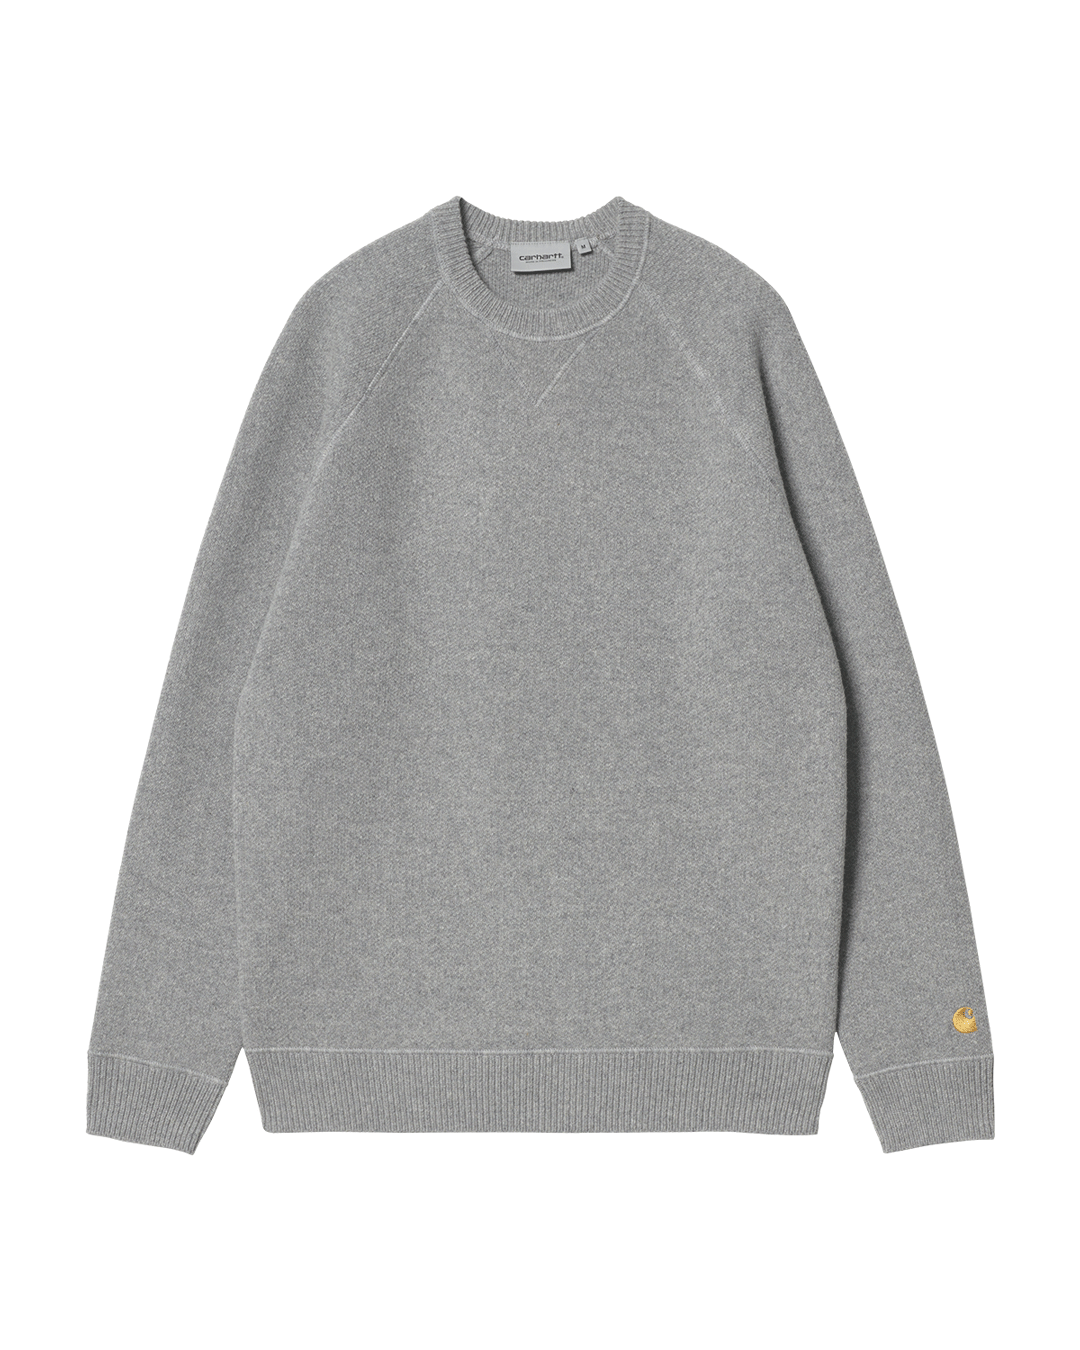 Chase Sweater Grey Heather/Gold